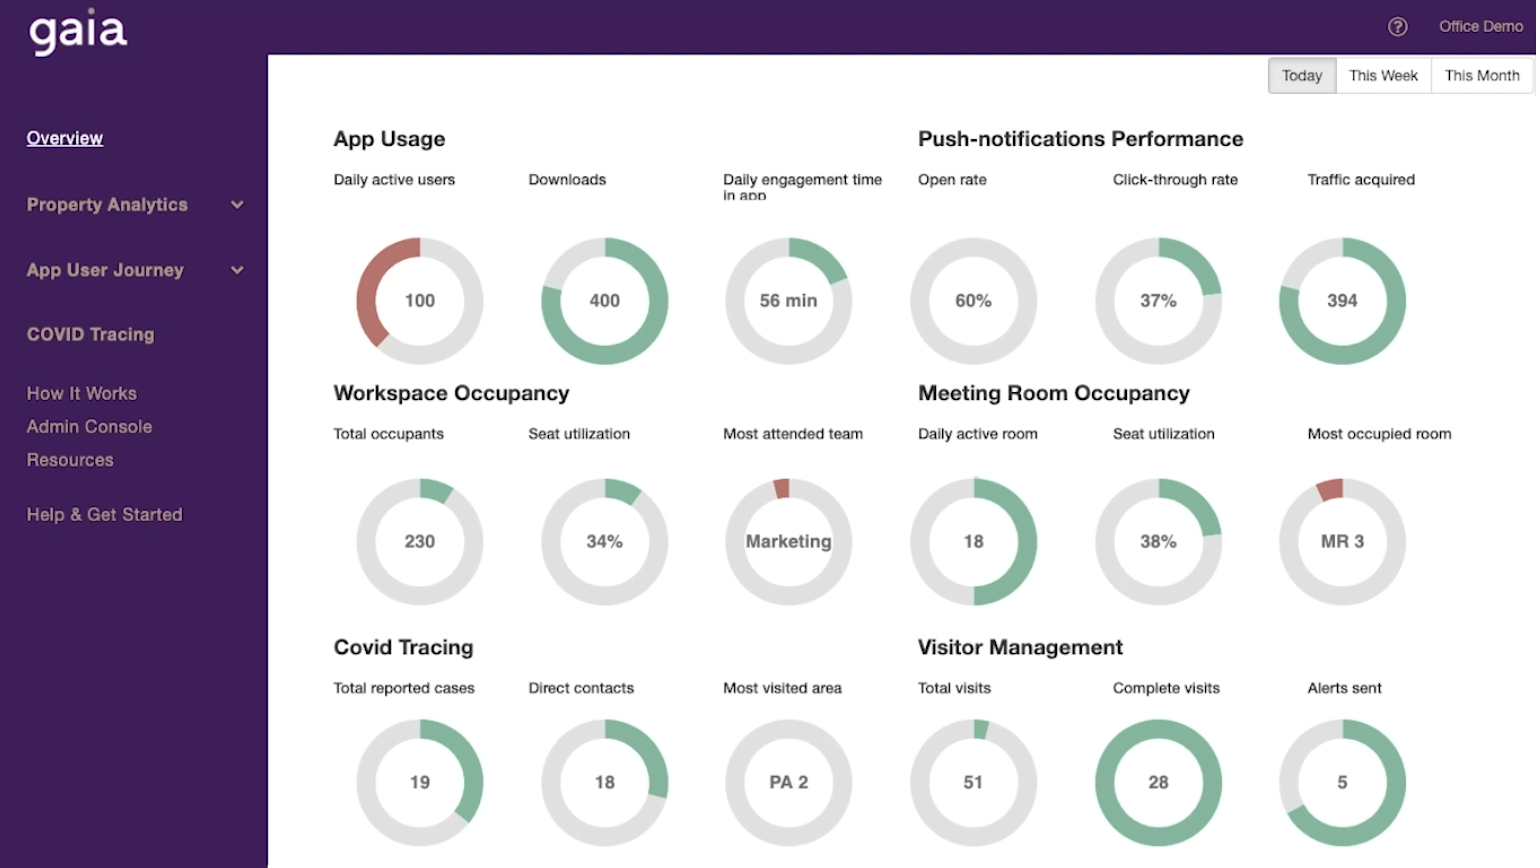 Gaia office dashboard showing data on app usage, workspace occupancy, covid tracing and more